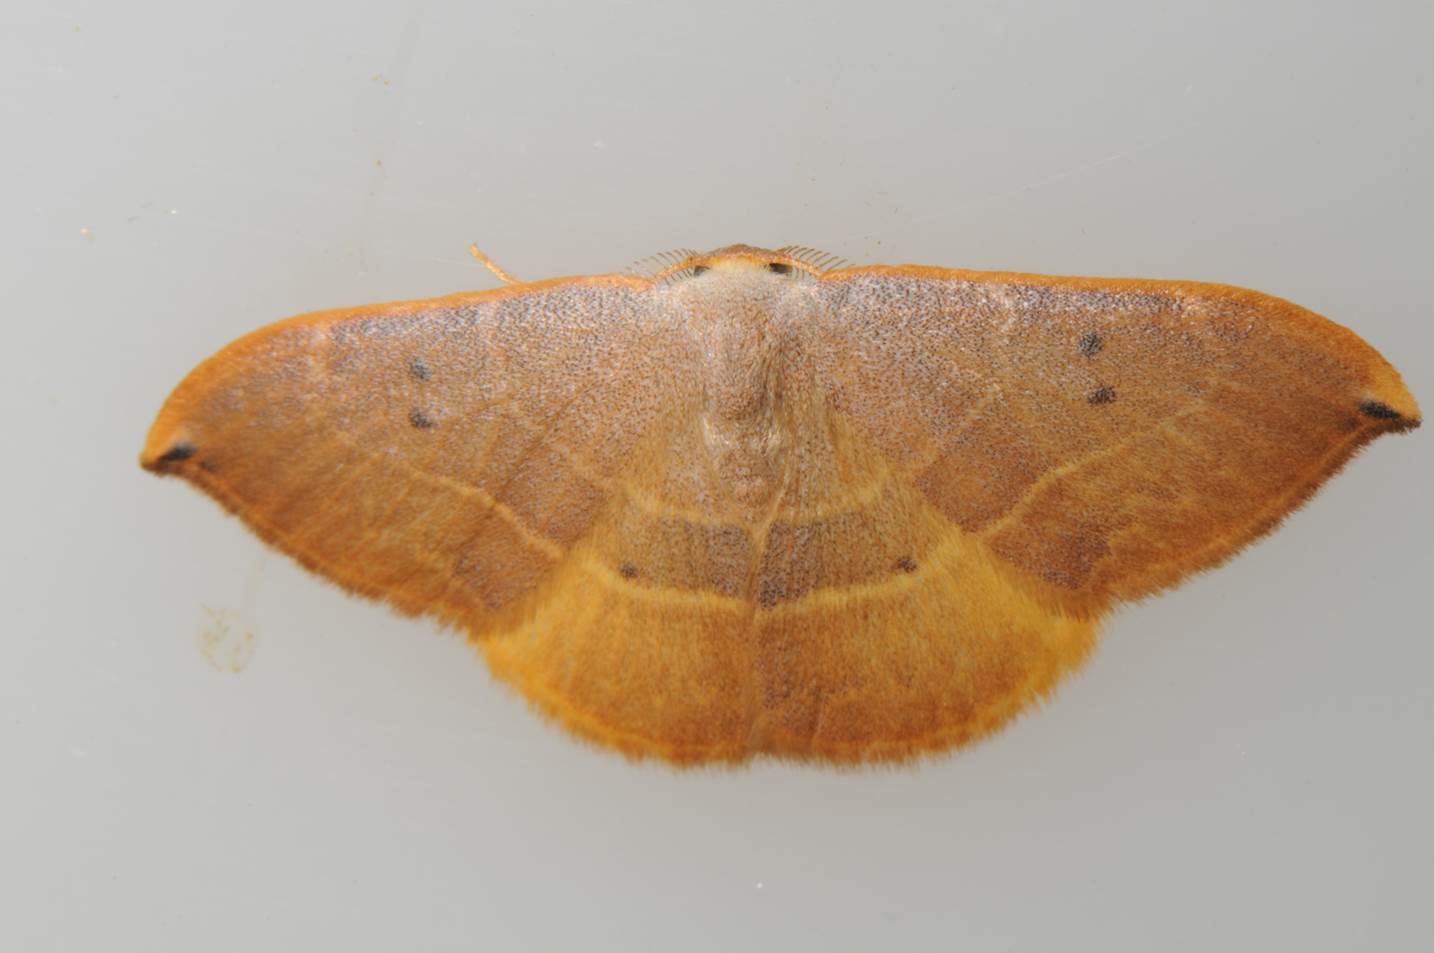 A close up of a moth

Description automatically generated